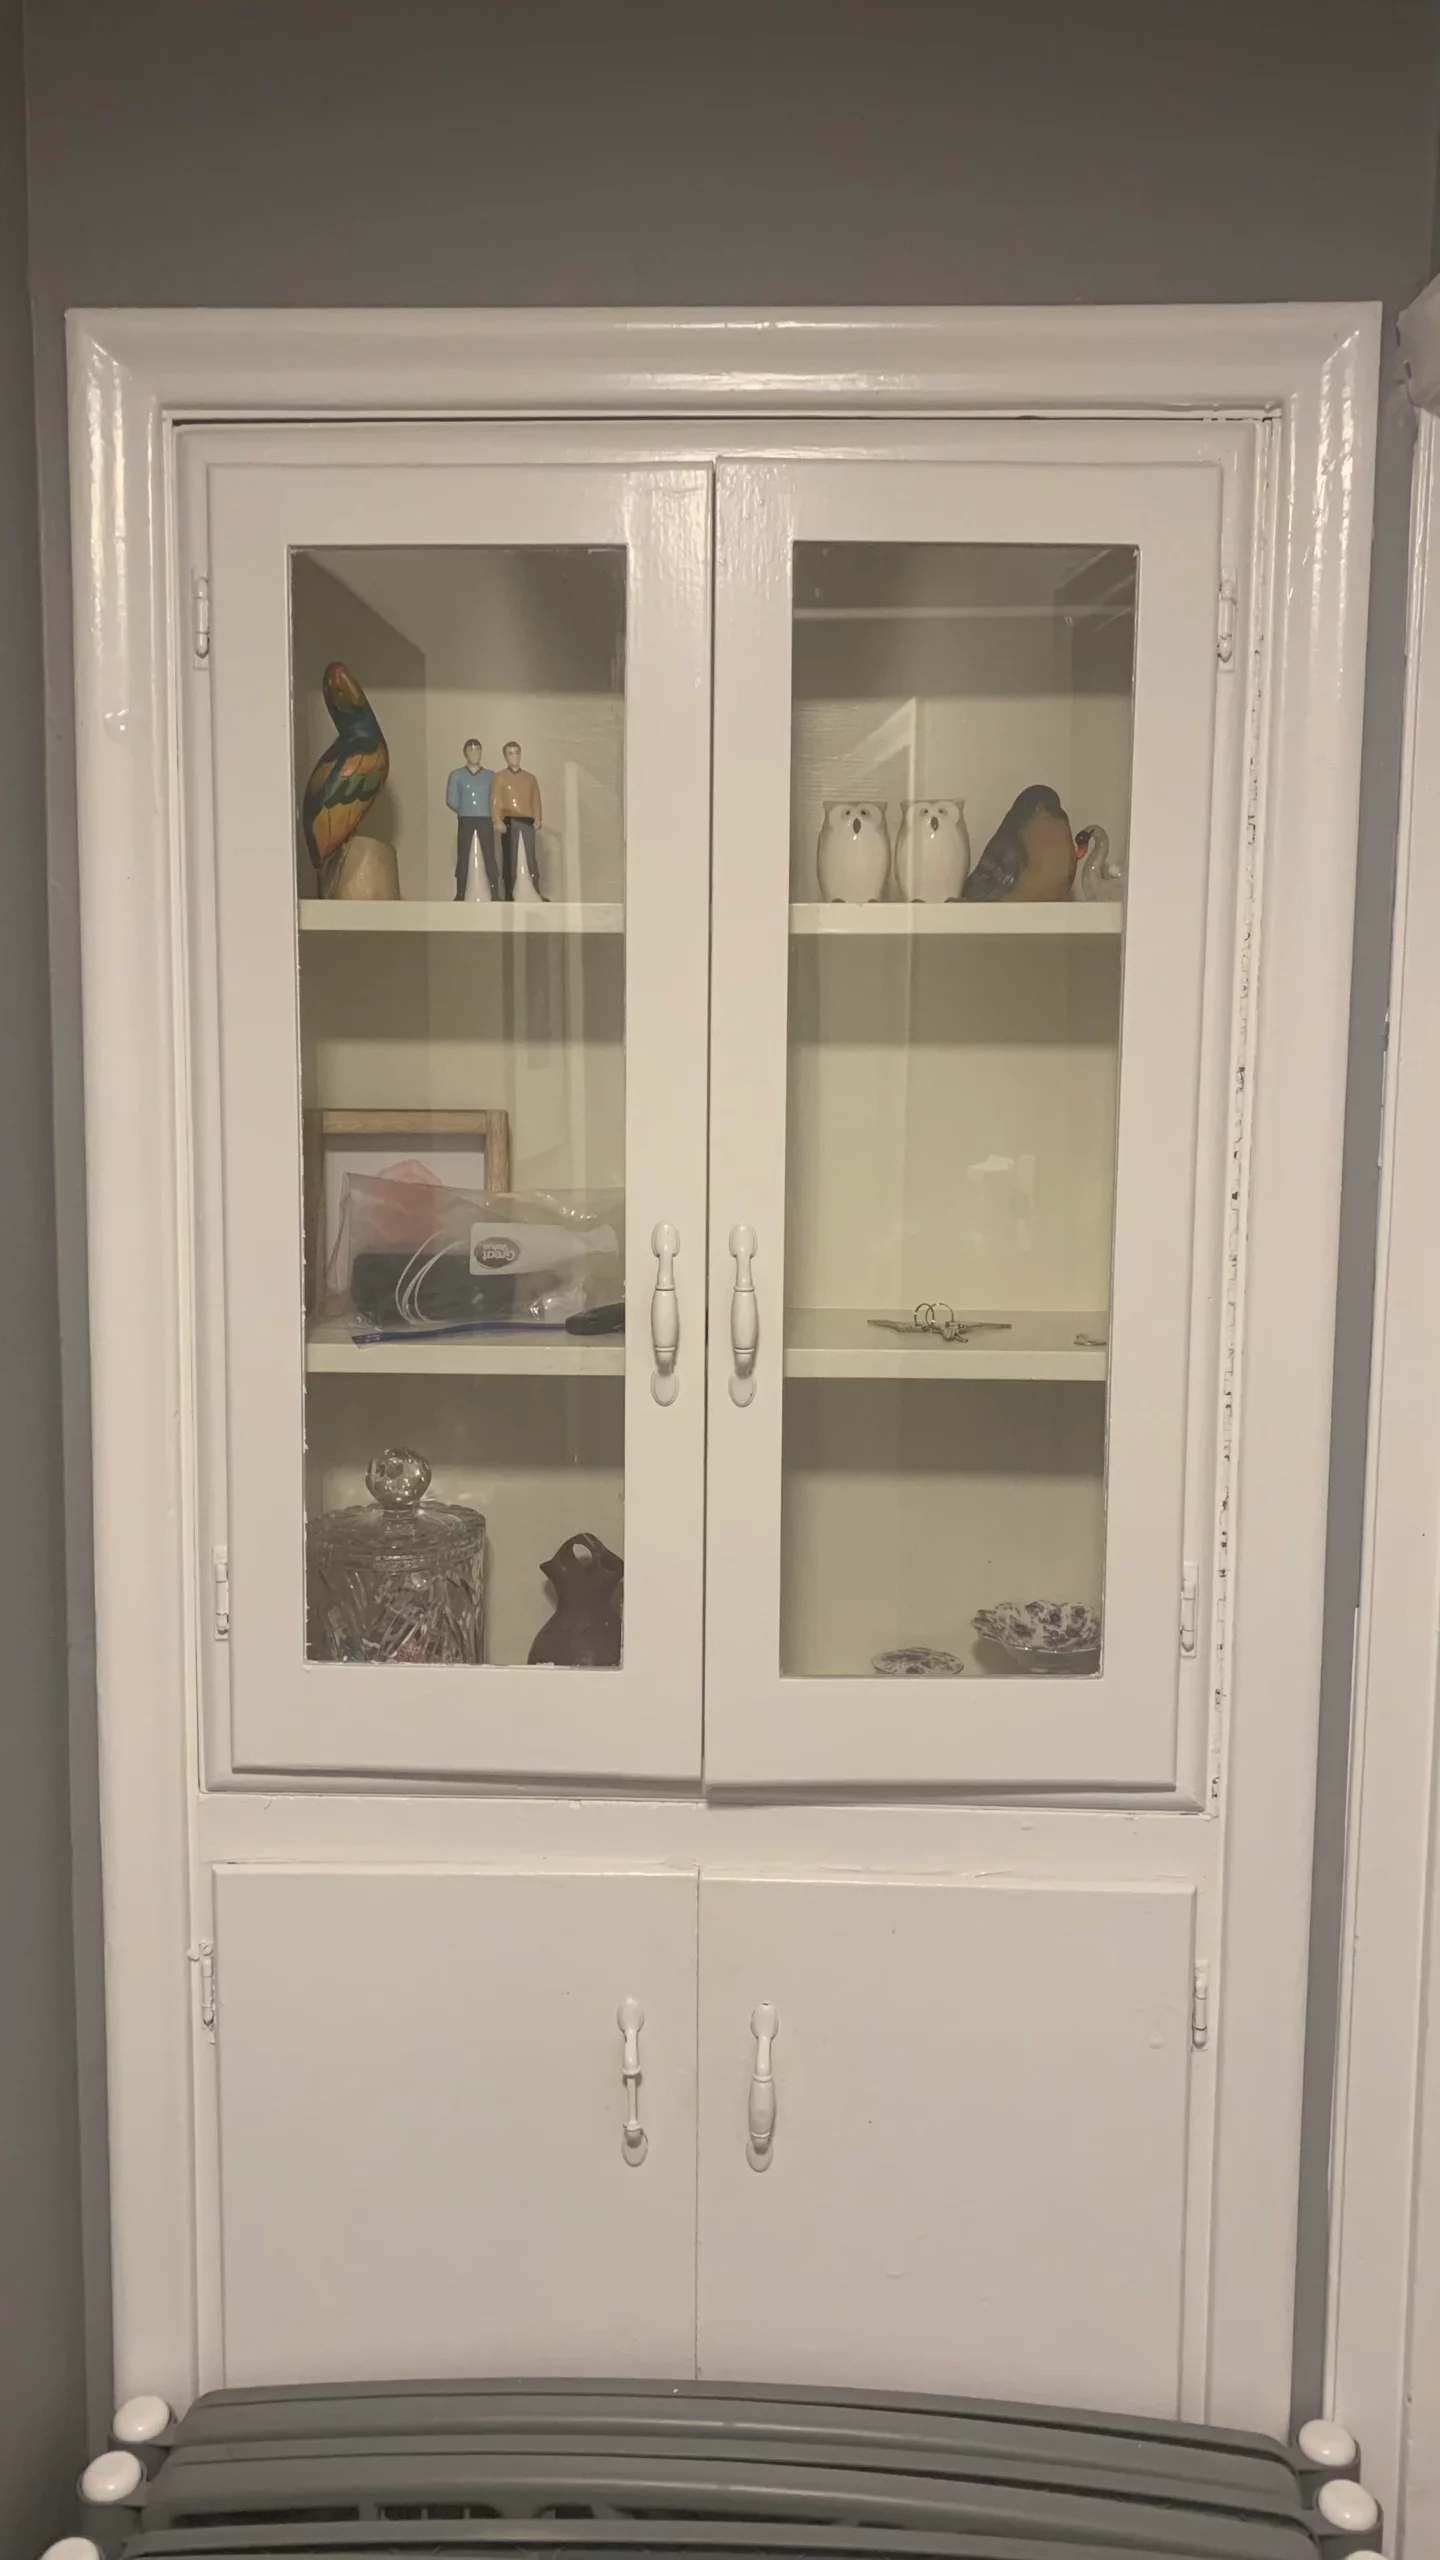 white cabinet built into the wall